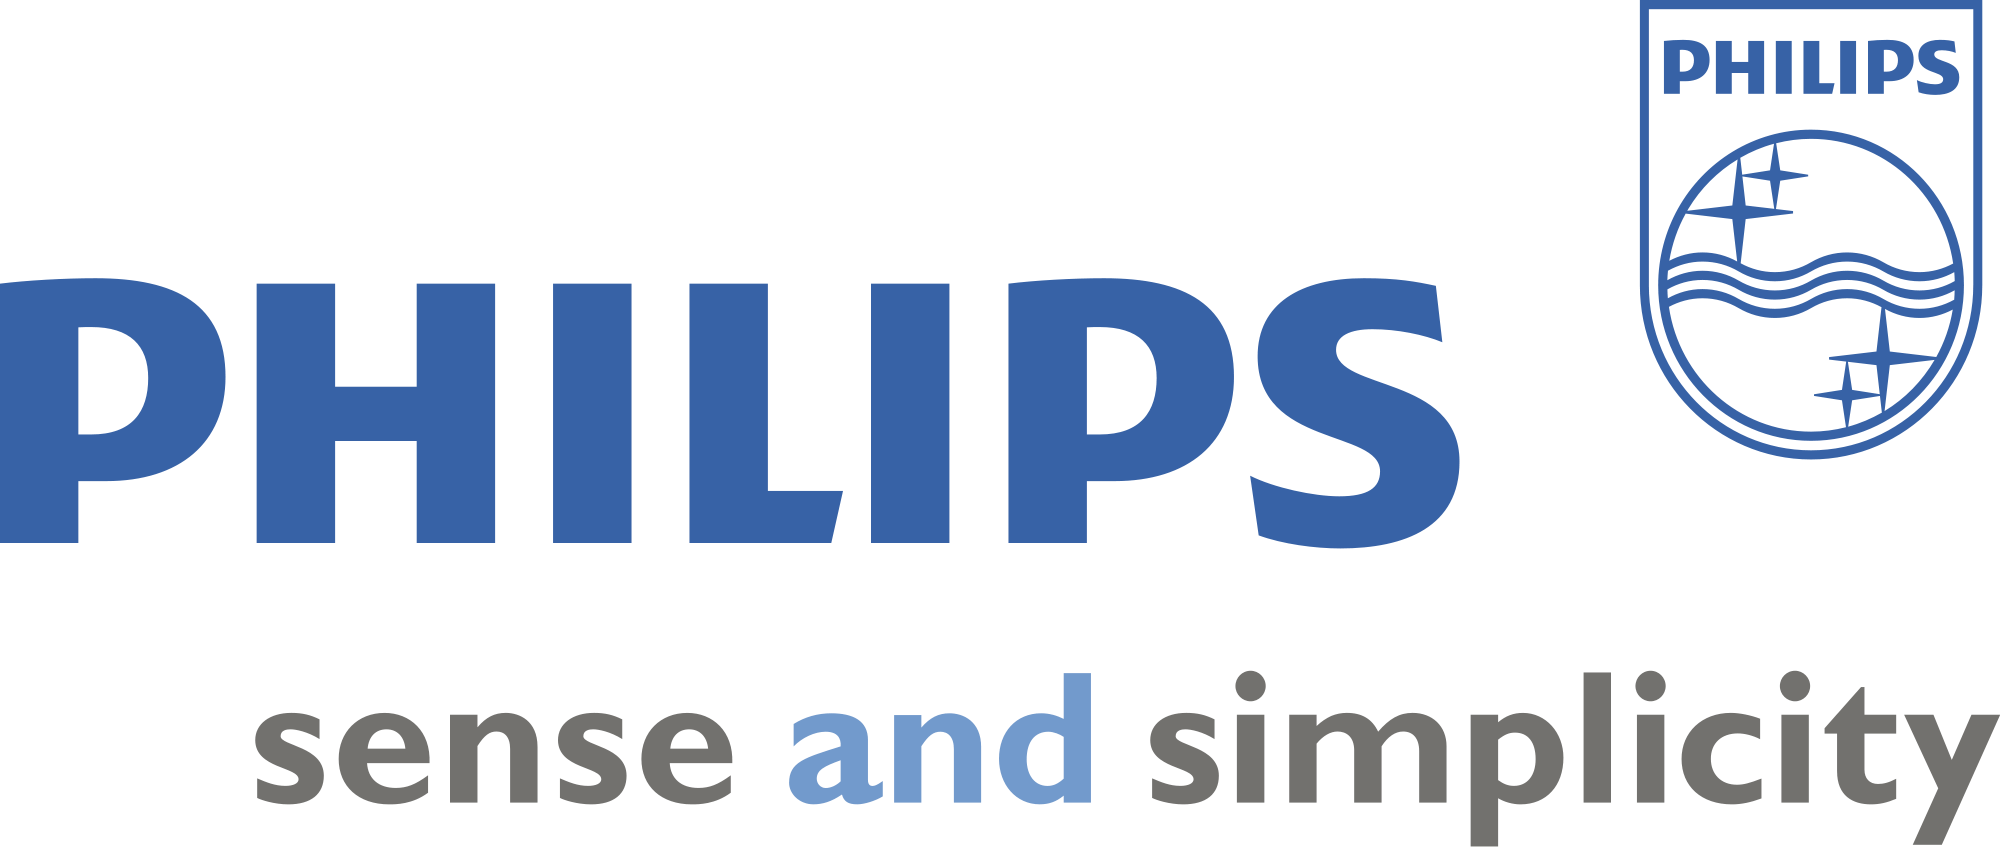 New Philips Shield Logo - Philips sense and simplicity with Shield.svg